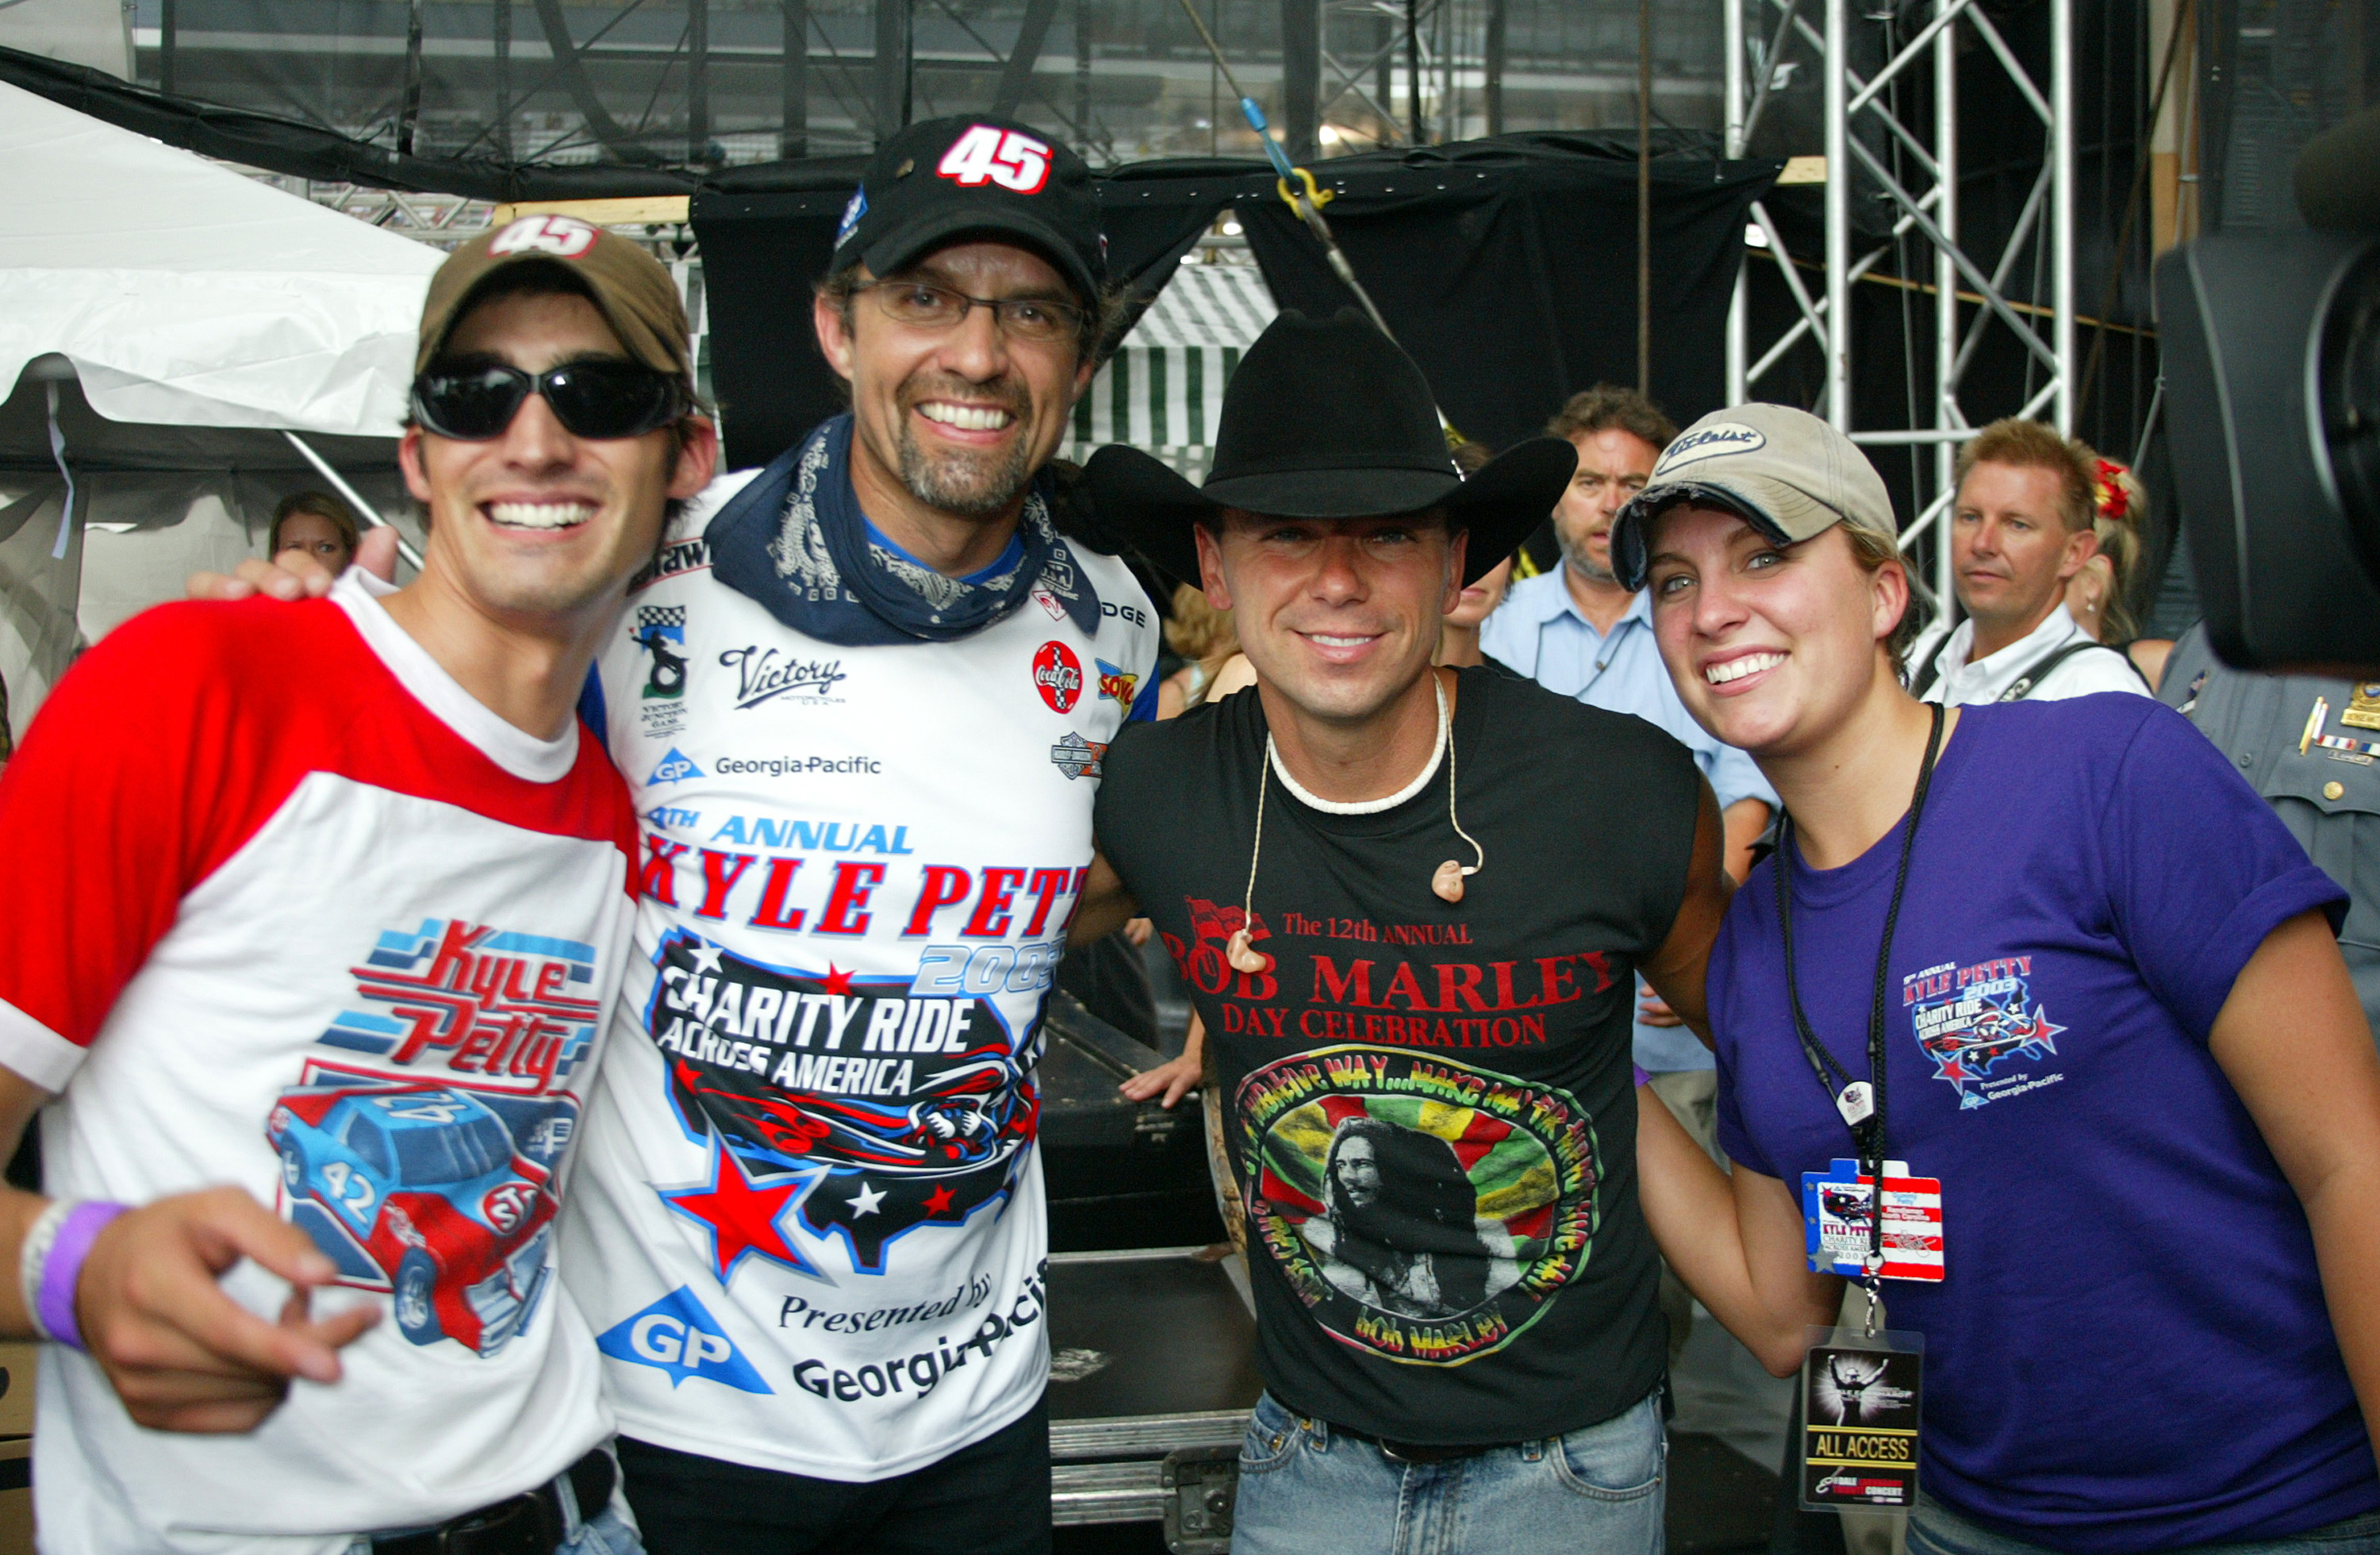 Kyle Petty, Austin Petty, Kenny Chesney, and Montgomery Lee Petty on June 28, 2003. | Source: Getty Images